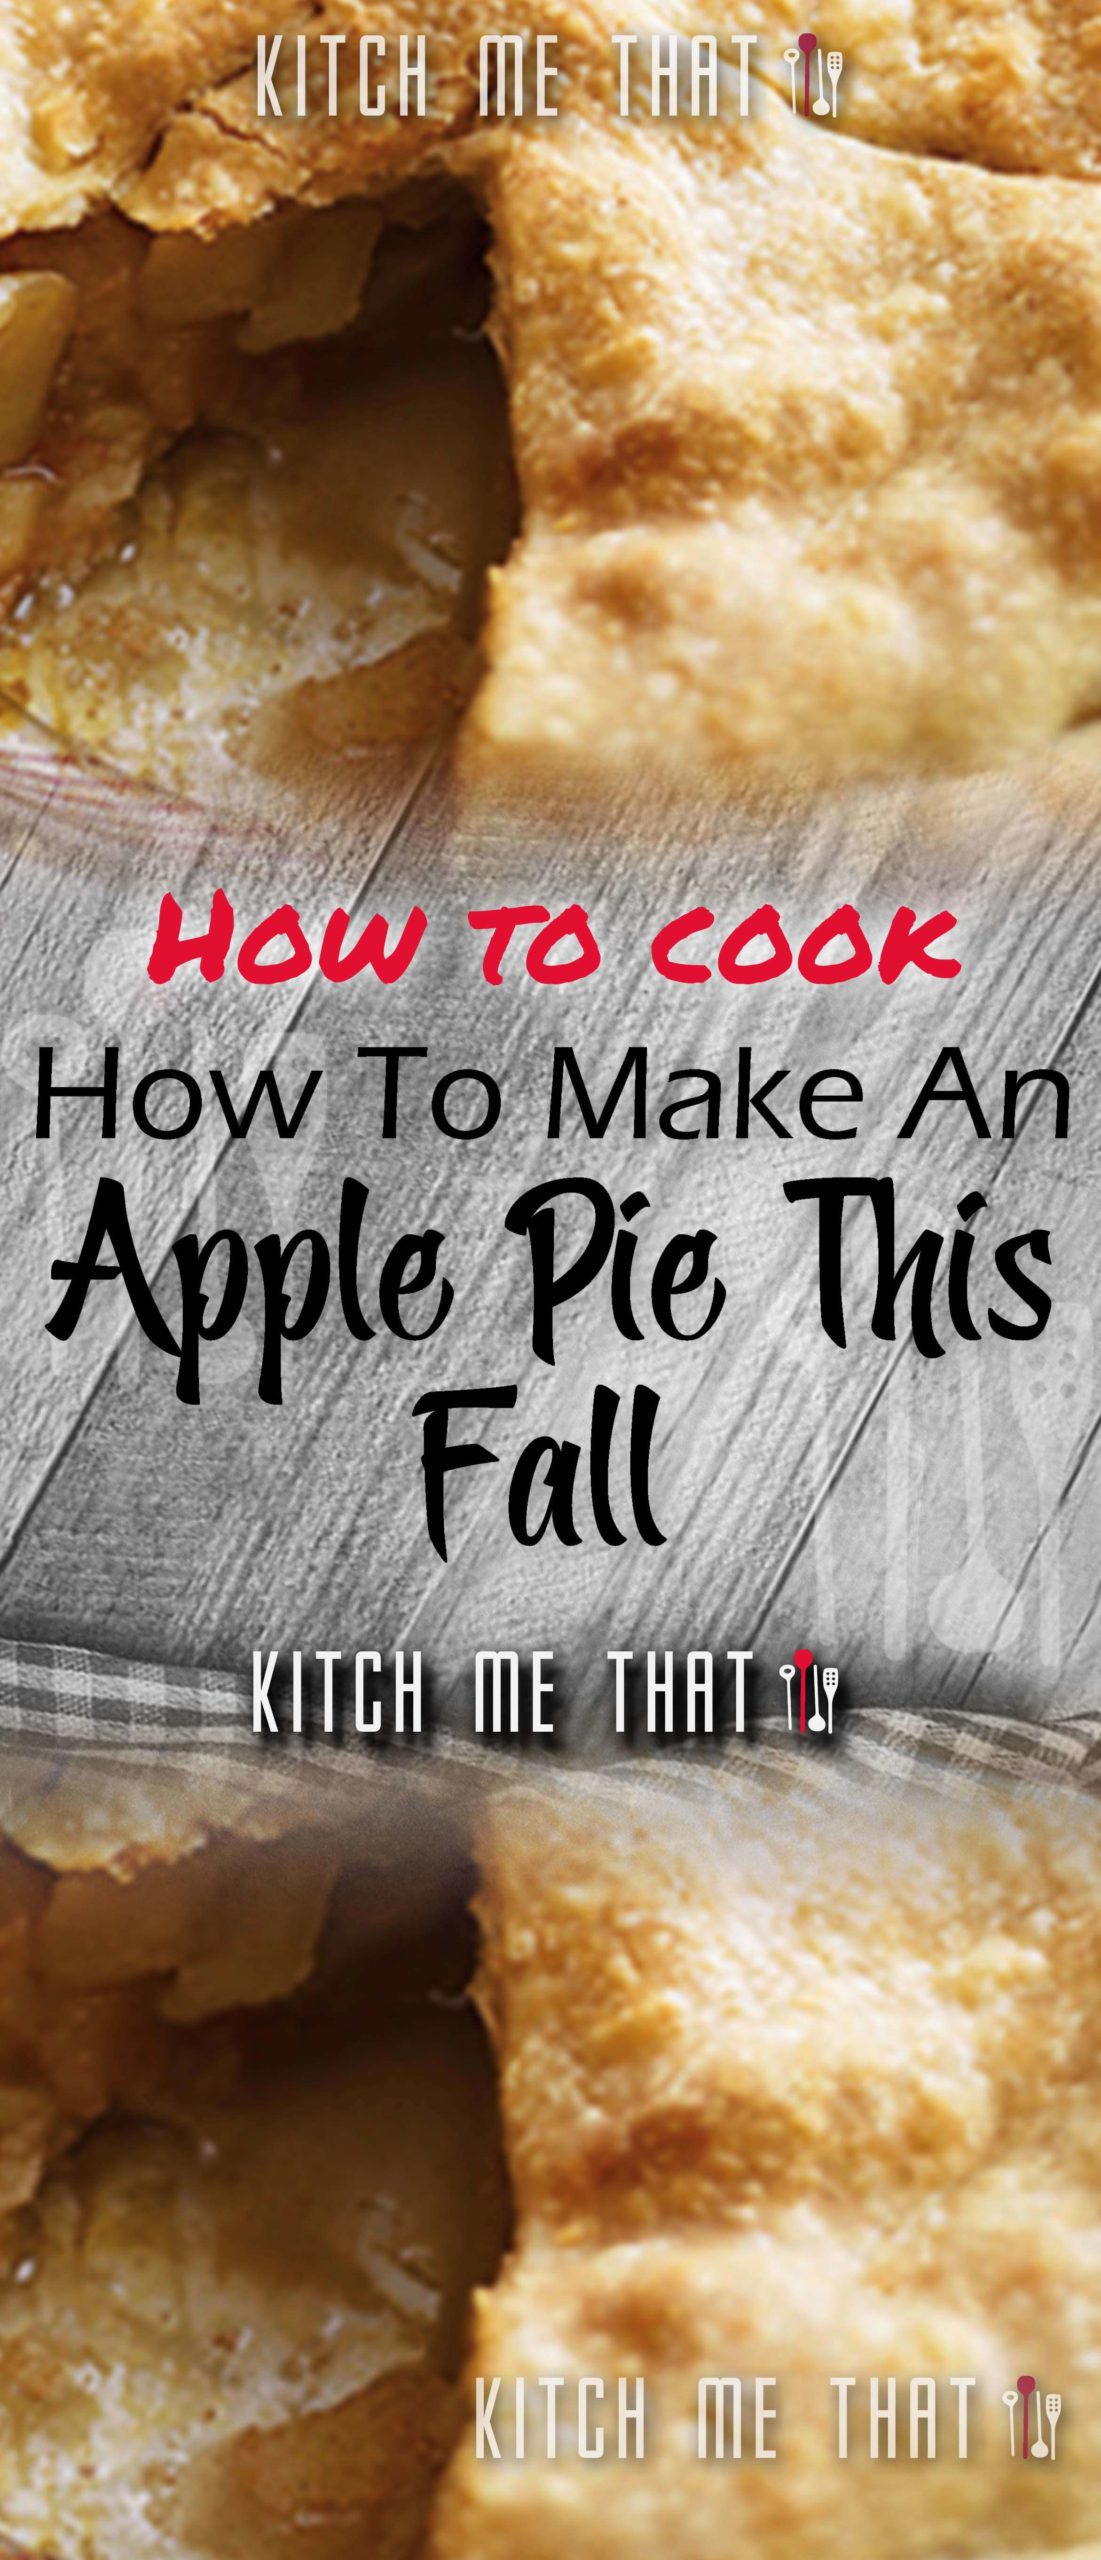 How To Make An Apple Pie This Fall